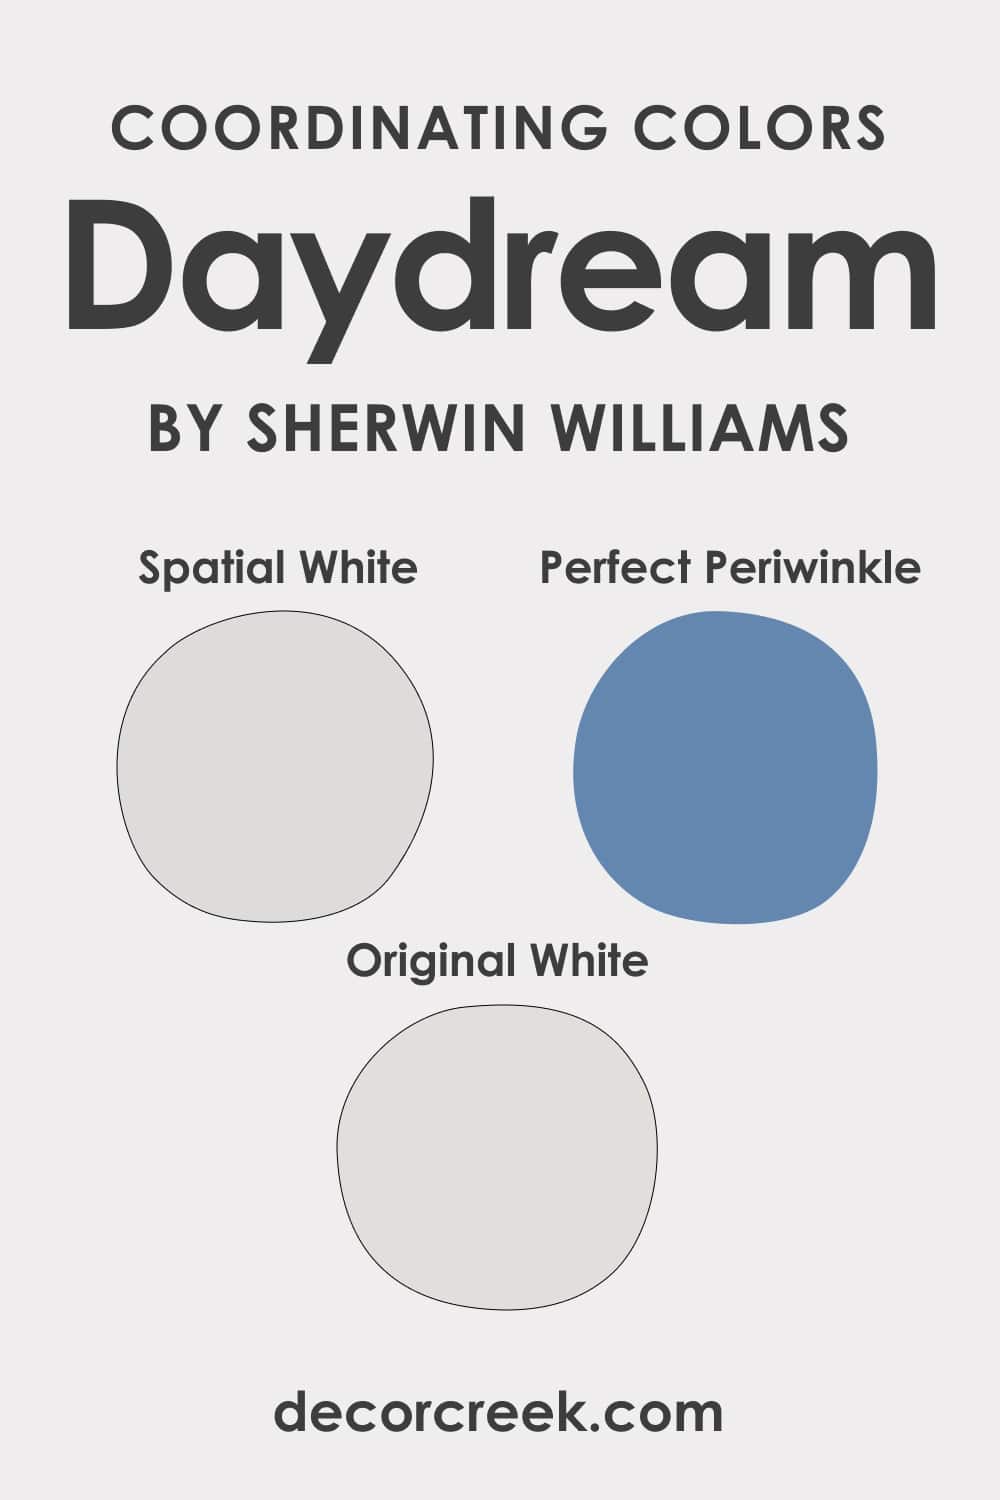 Coordinating Colors of Daydream SW-6541